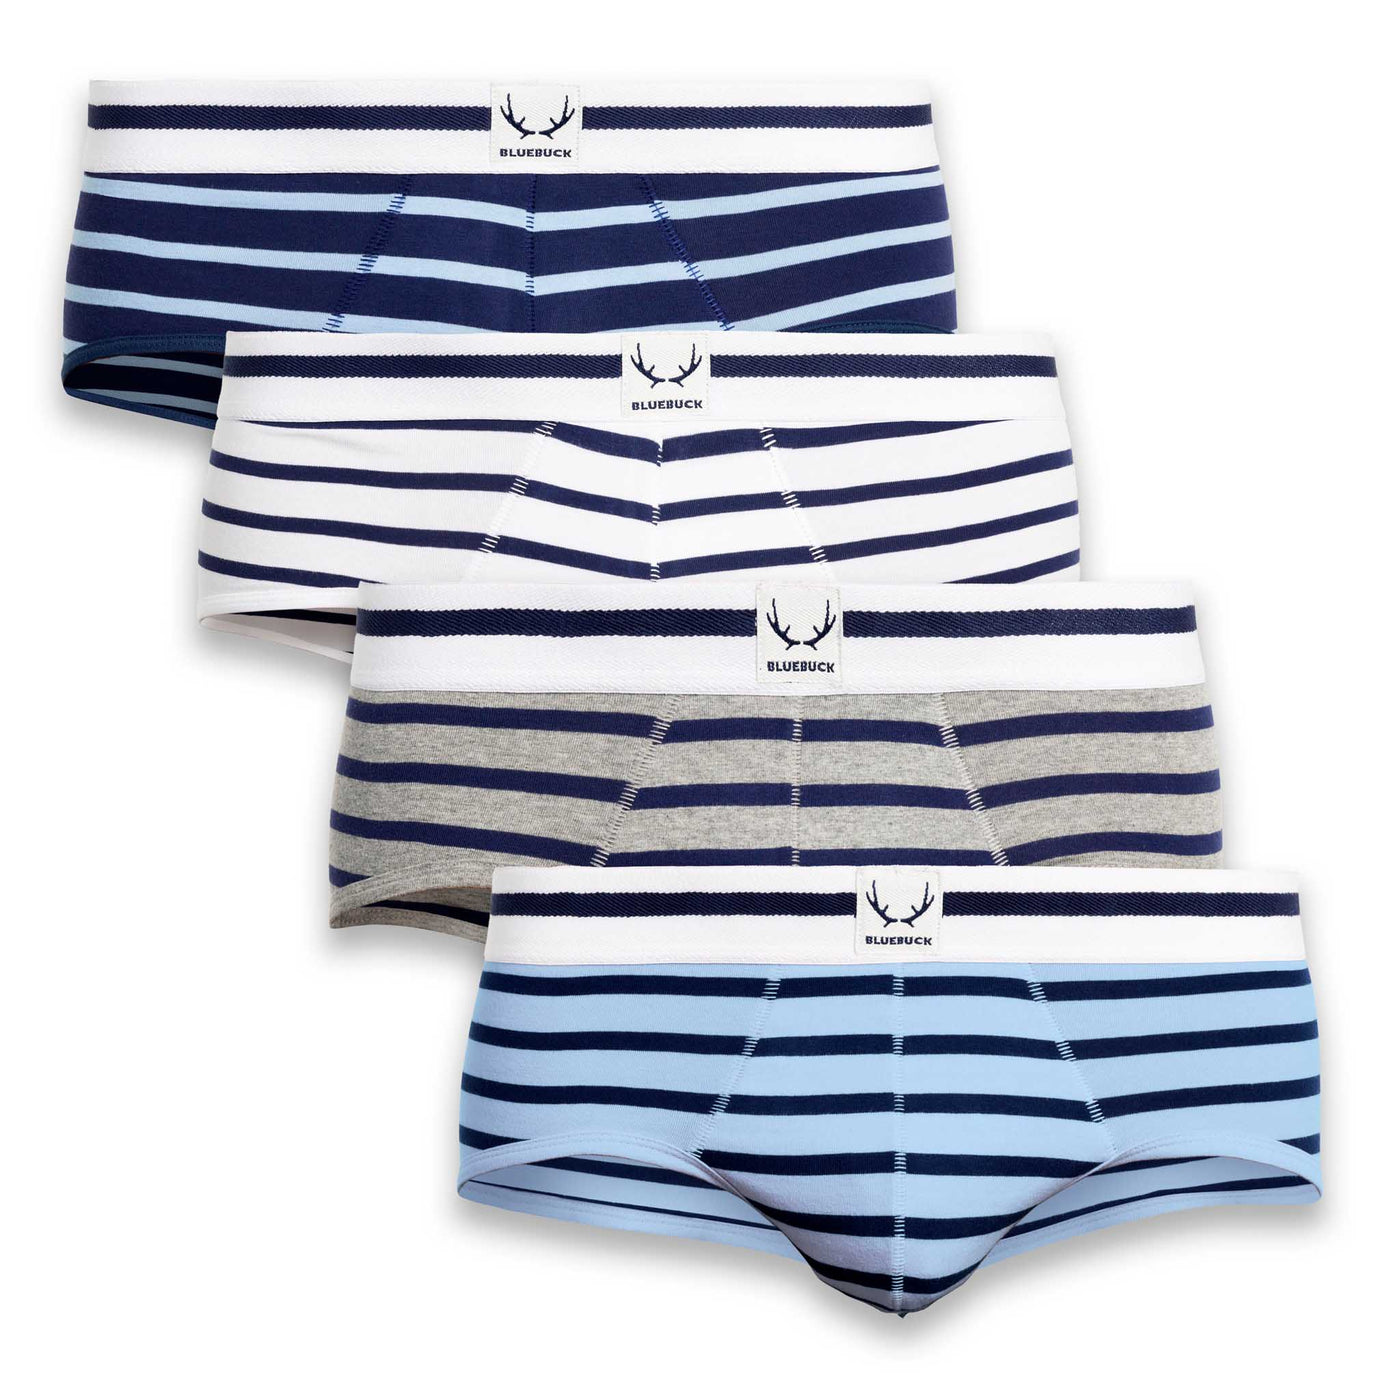 4 briefs with stripes for men in organic cotton